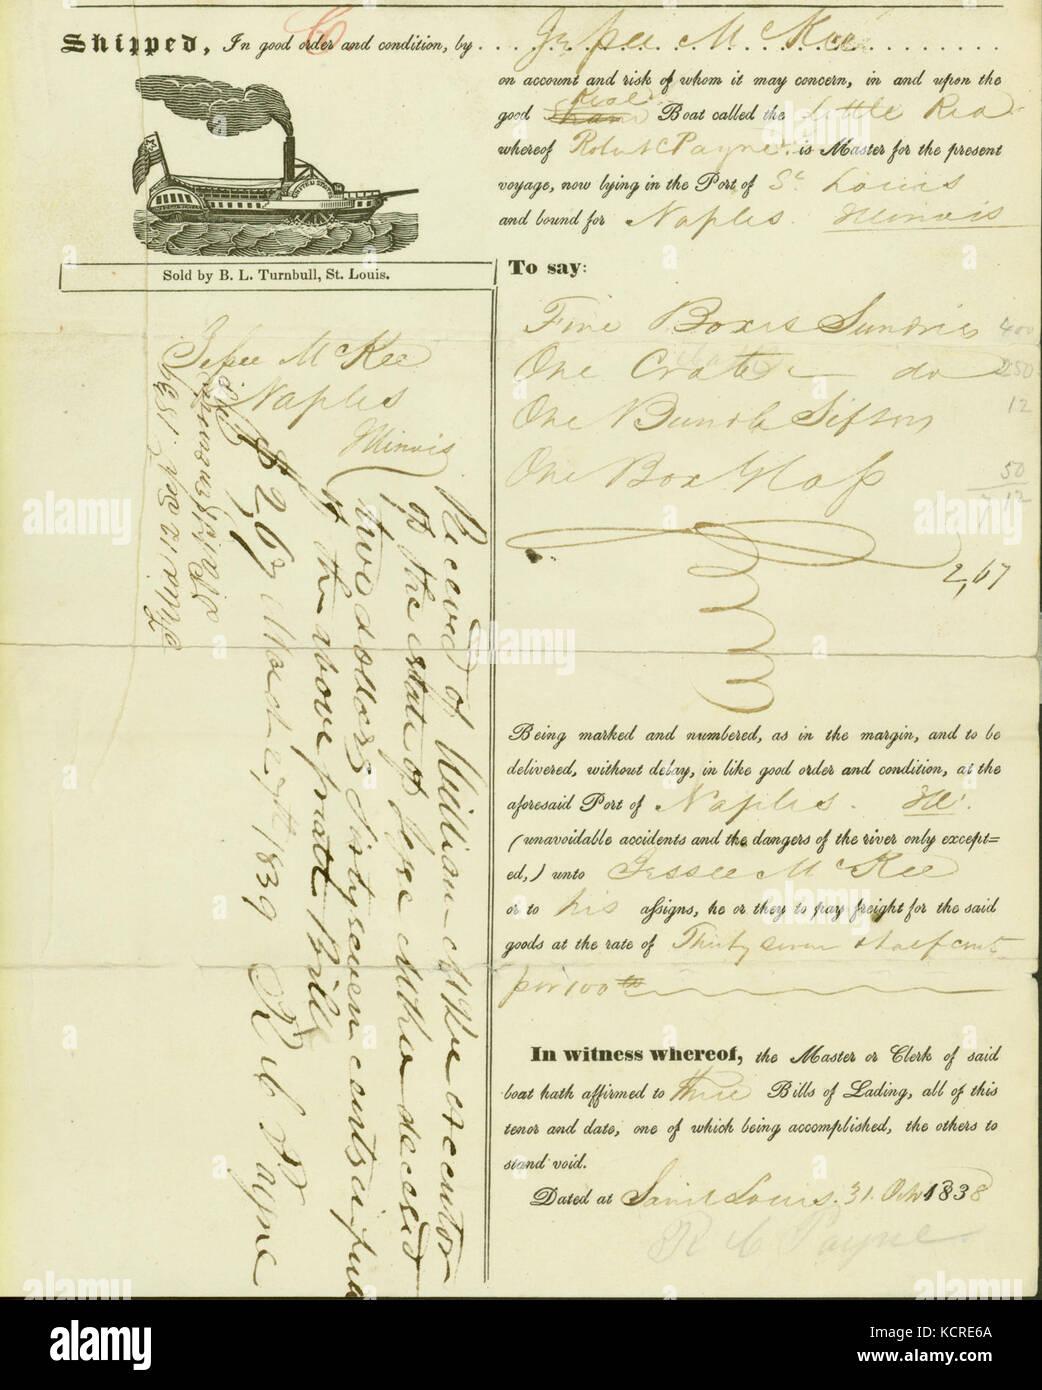 Bill of lading for sundries, scissors, and glass, shipped by Jesse McKee, St. Louis, on board the keel boat Little Red, to Jesse McKee, Naples, Illinois, October 31, 1838 Stock Photo